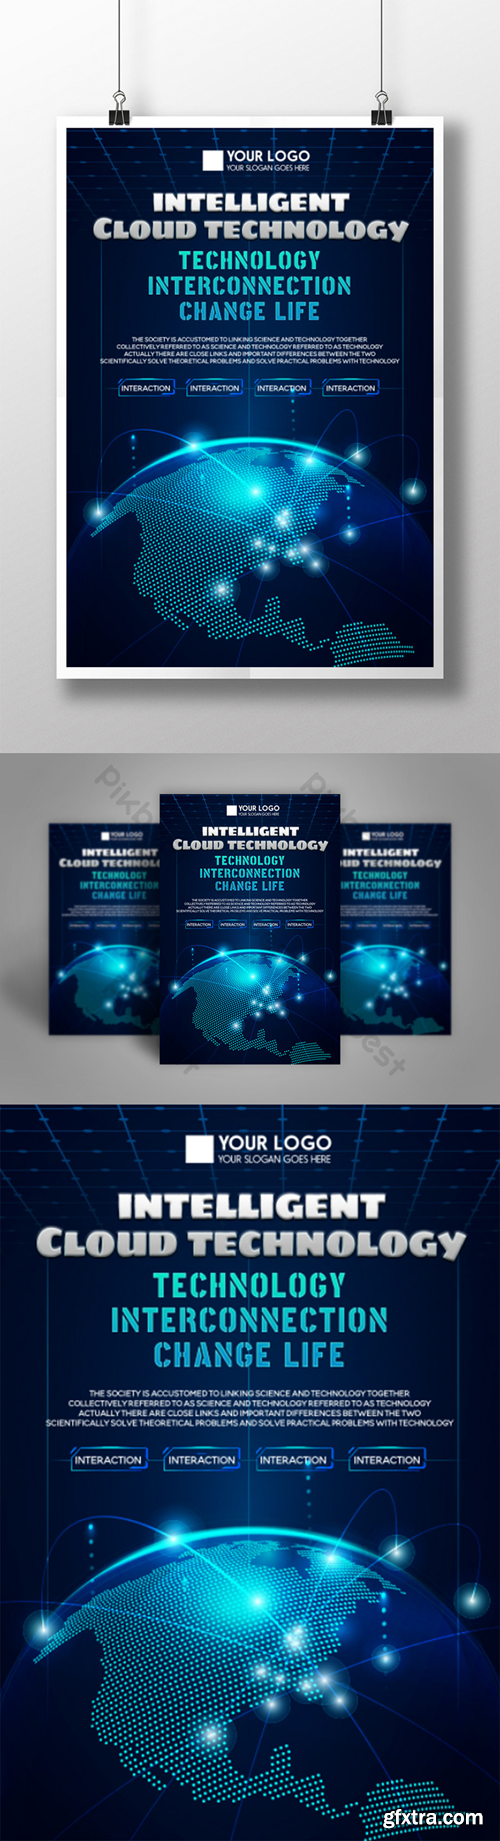 Blue style technology poster Template PSD